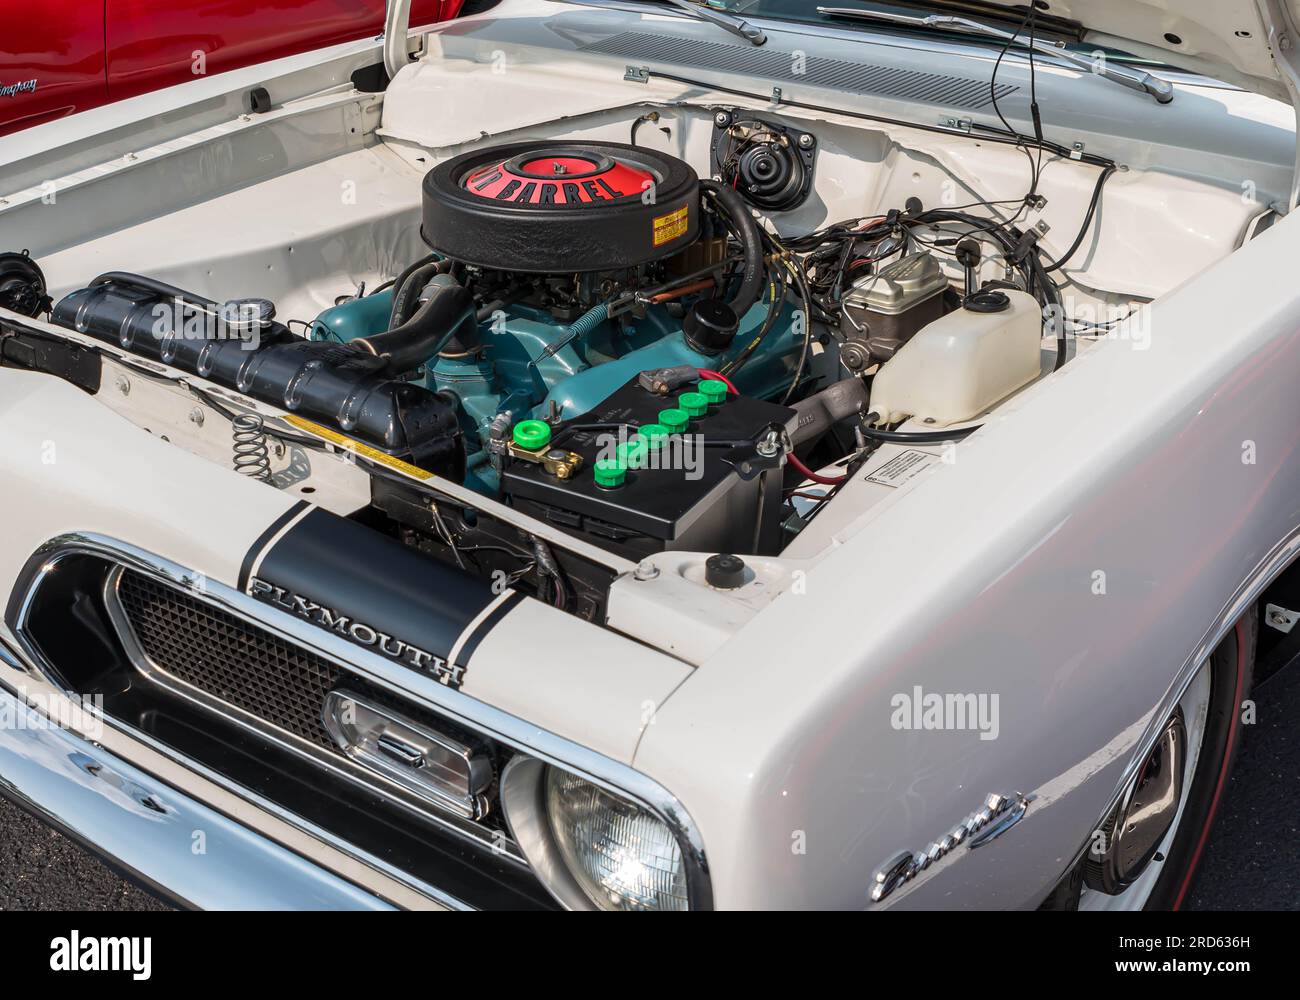 A 1965 Plymouth engine on display at a car show in Homestead, Pennsylvania, USA Stock Photo